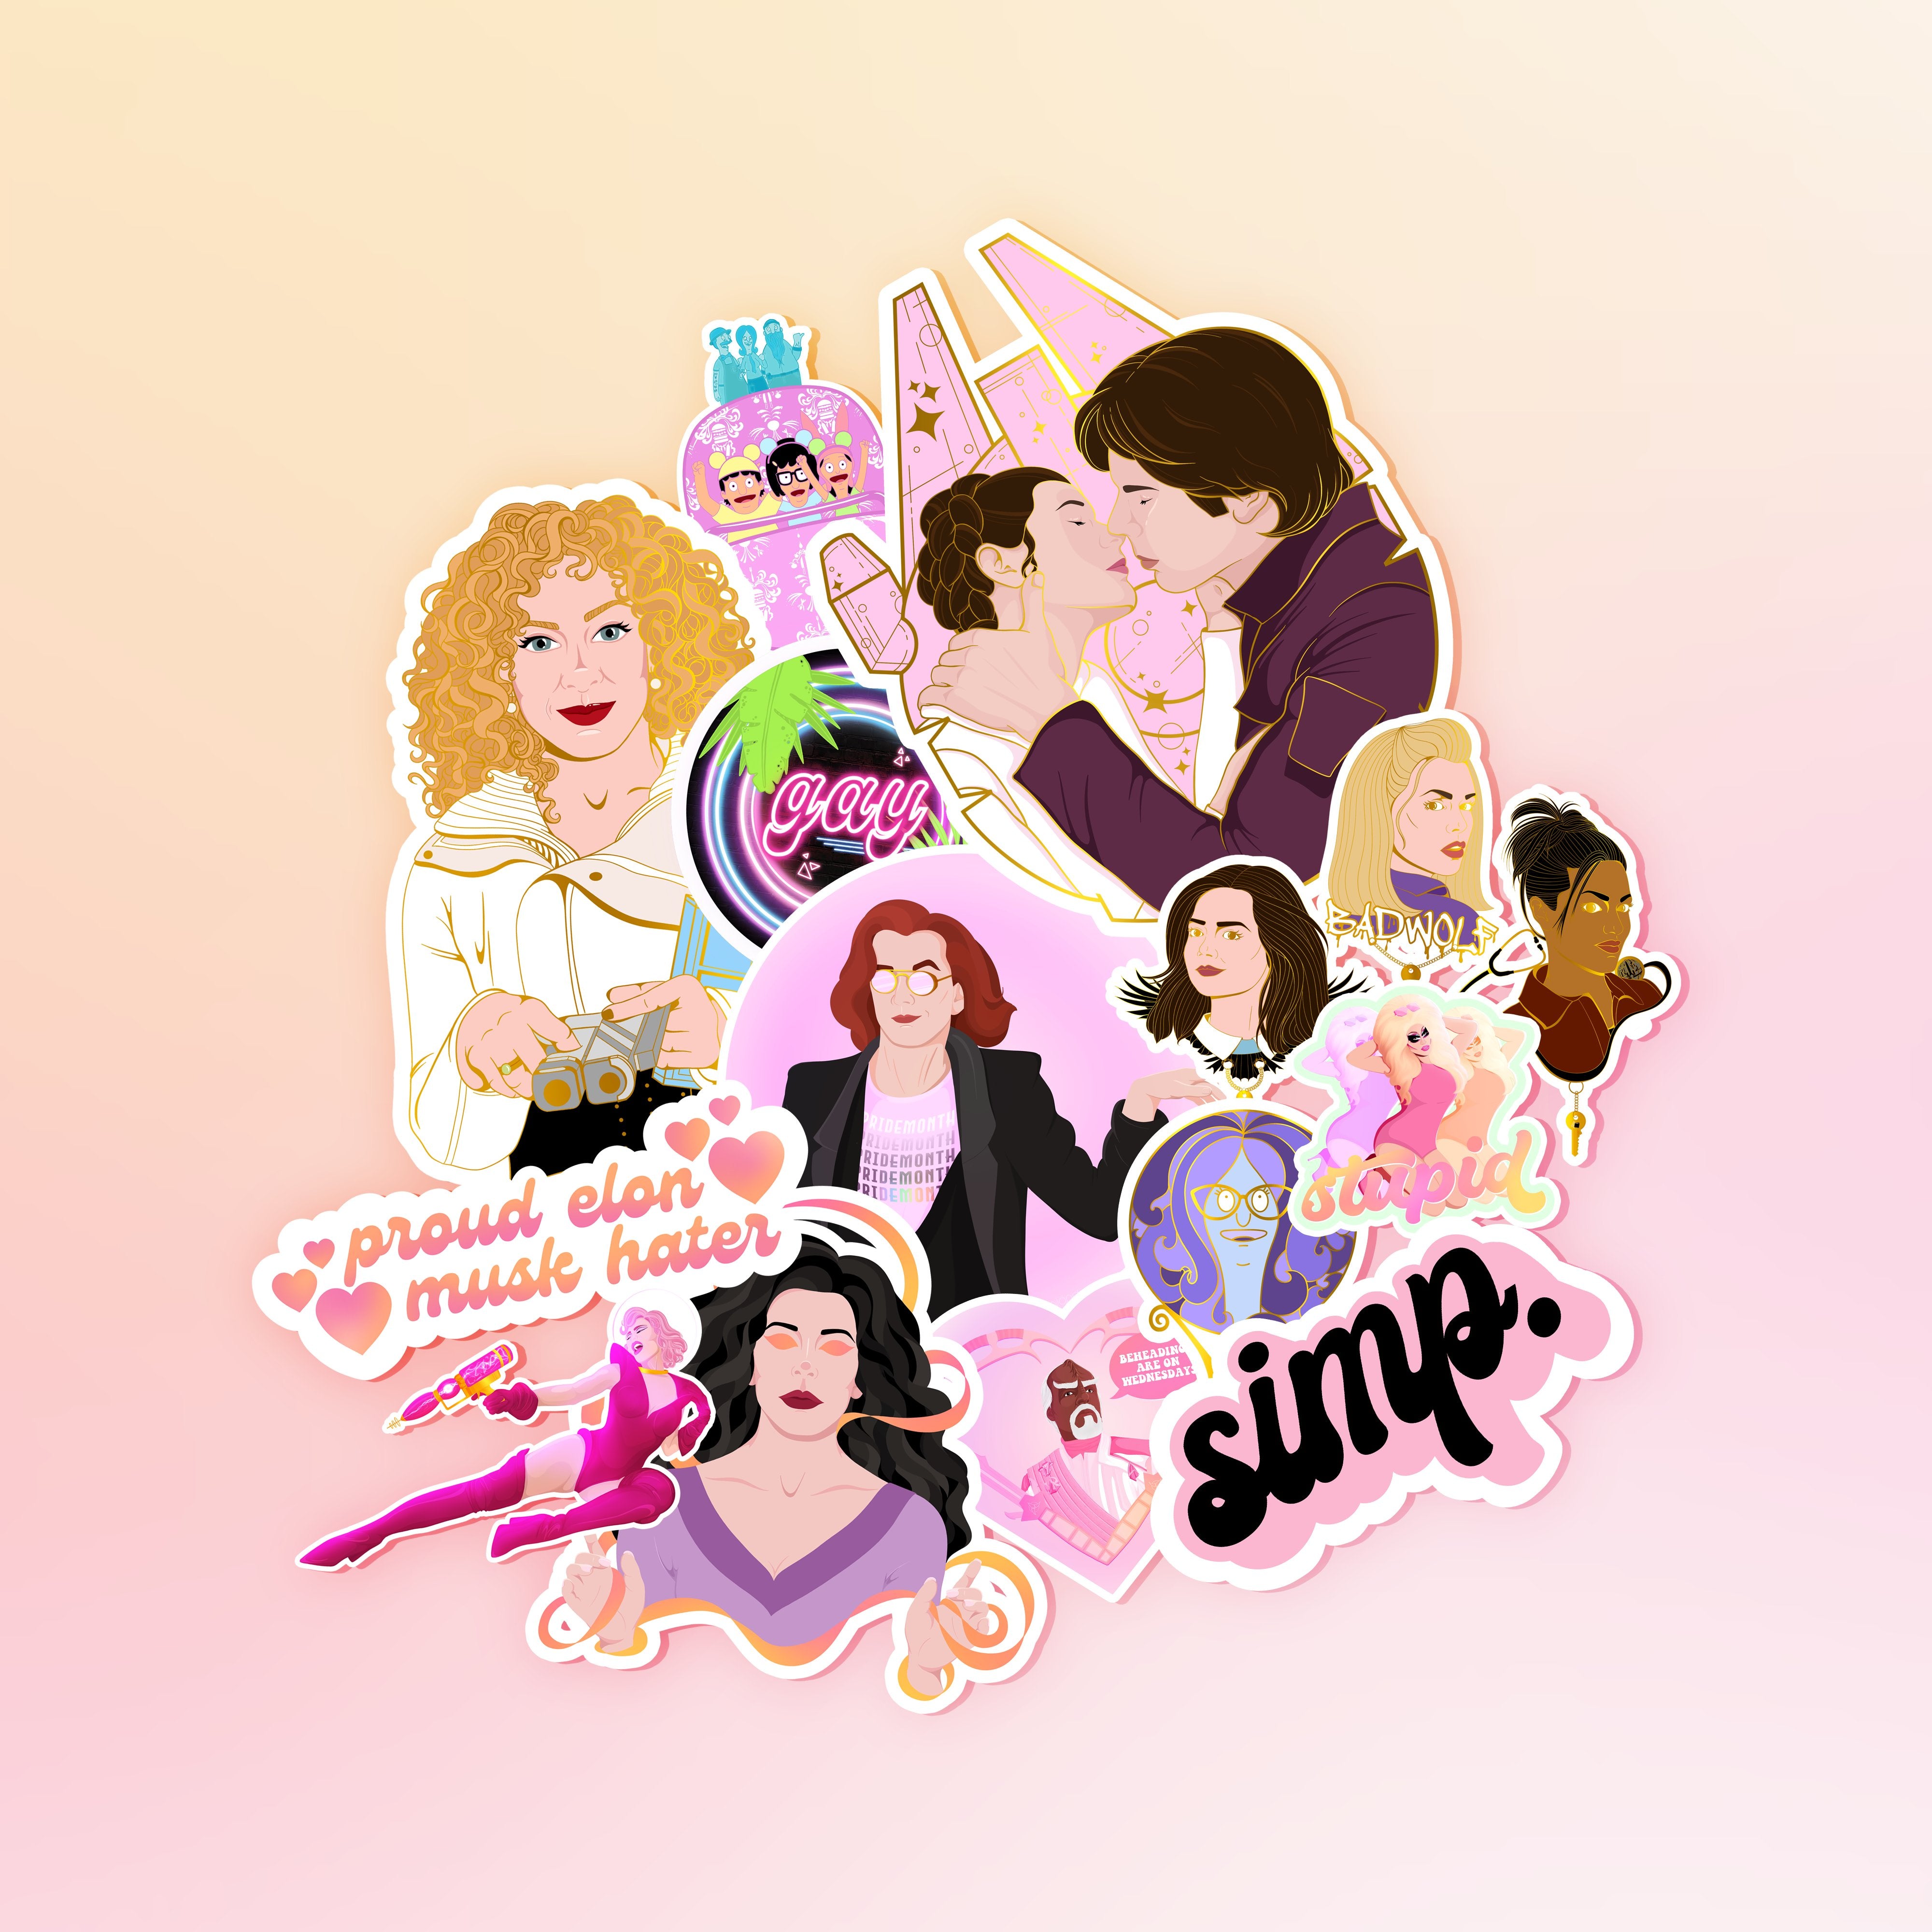 a collage of vibrant, pastel stickers featuring pop culture characters from star trek, doctor who, bob's burgers, star wars, and more.